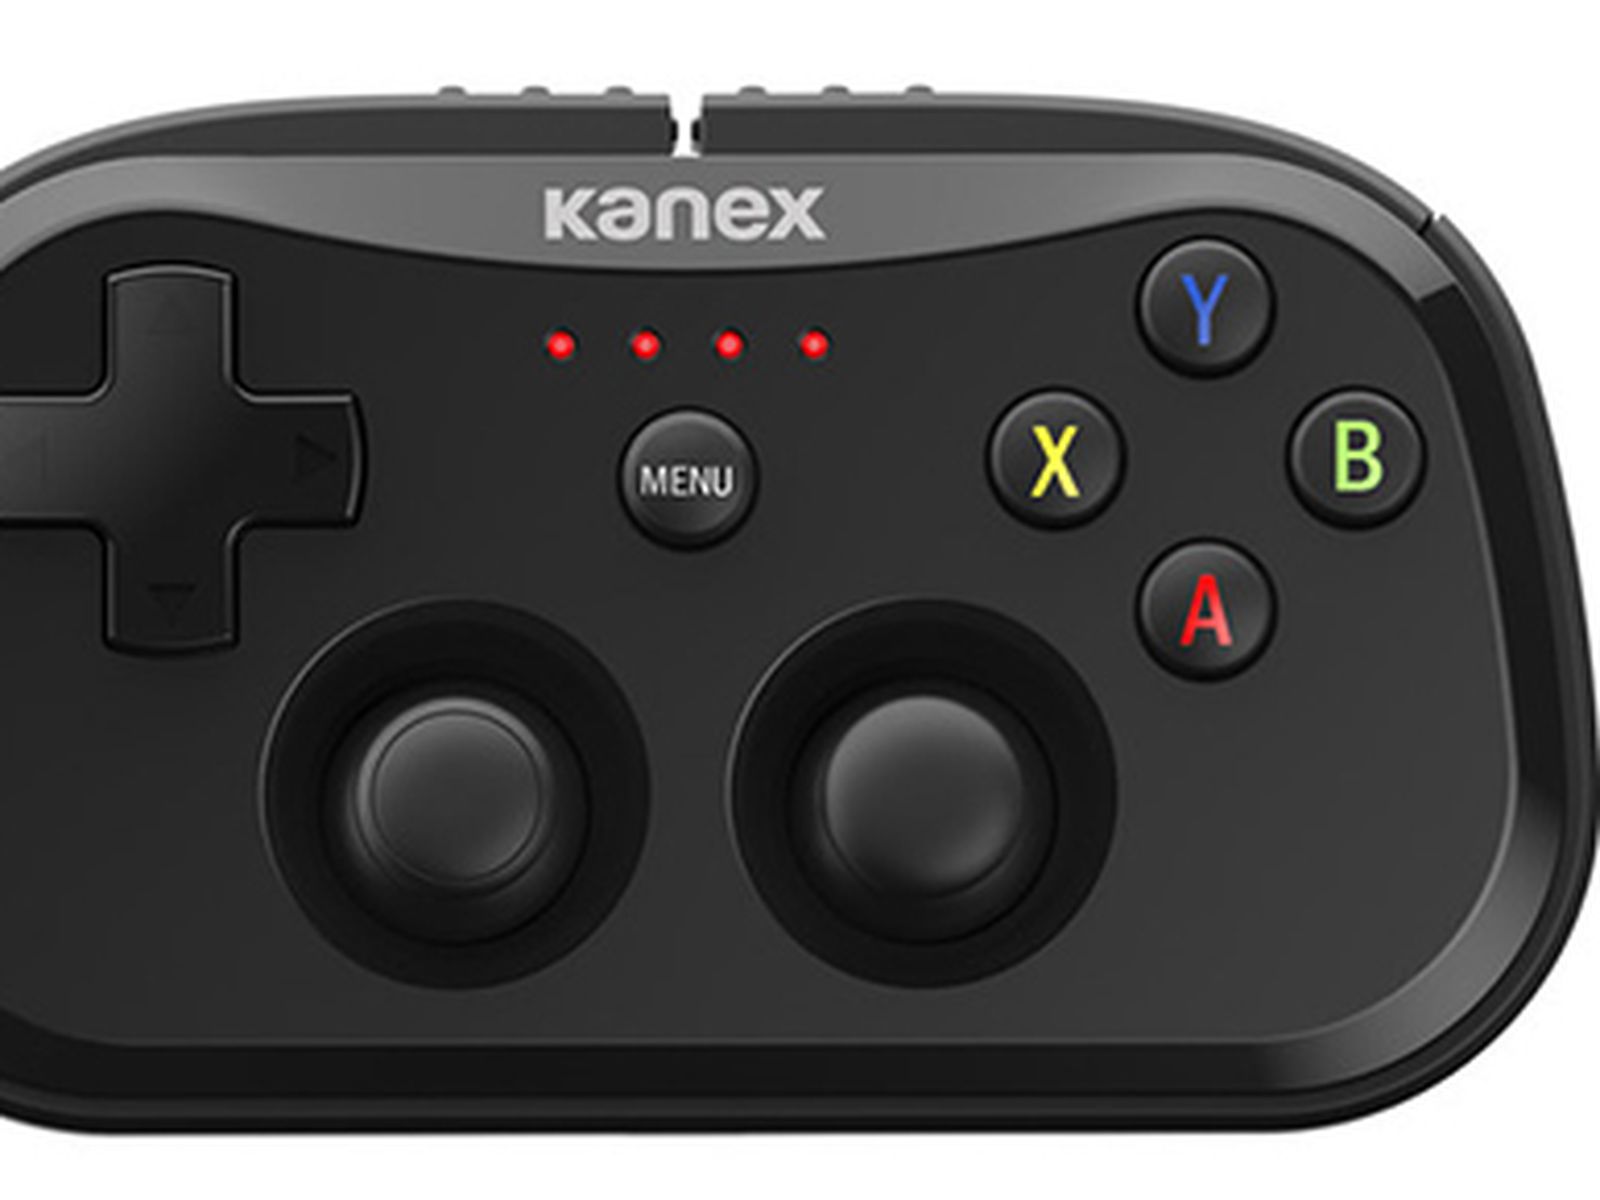 Kanex S Goplay Sidekick Pocket Sized Game Controller For Iphone Ipad And Apple Tv Now Available Macrumors